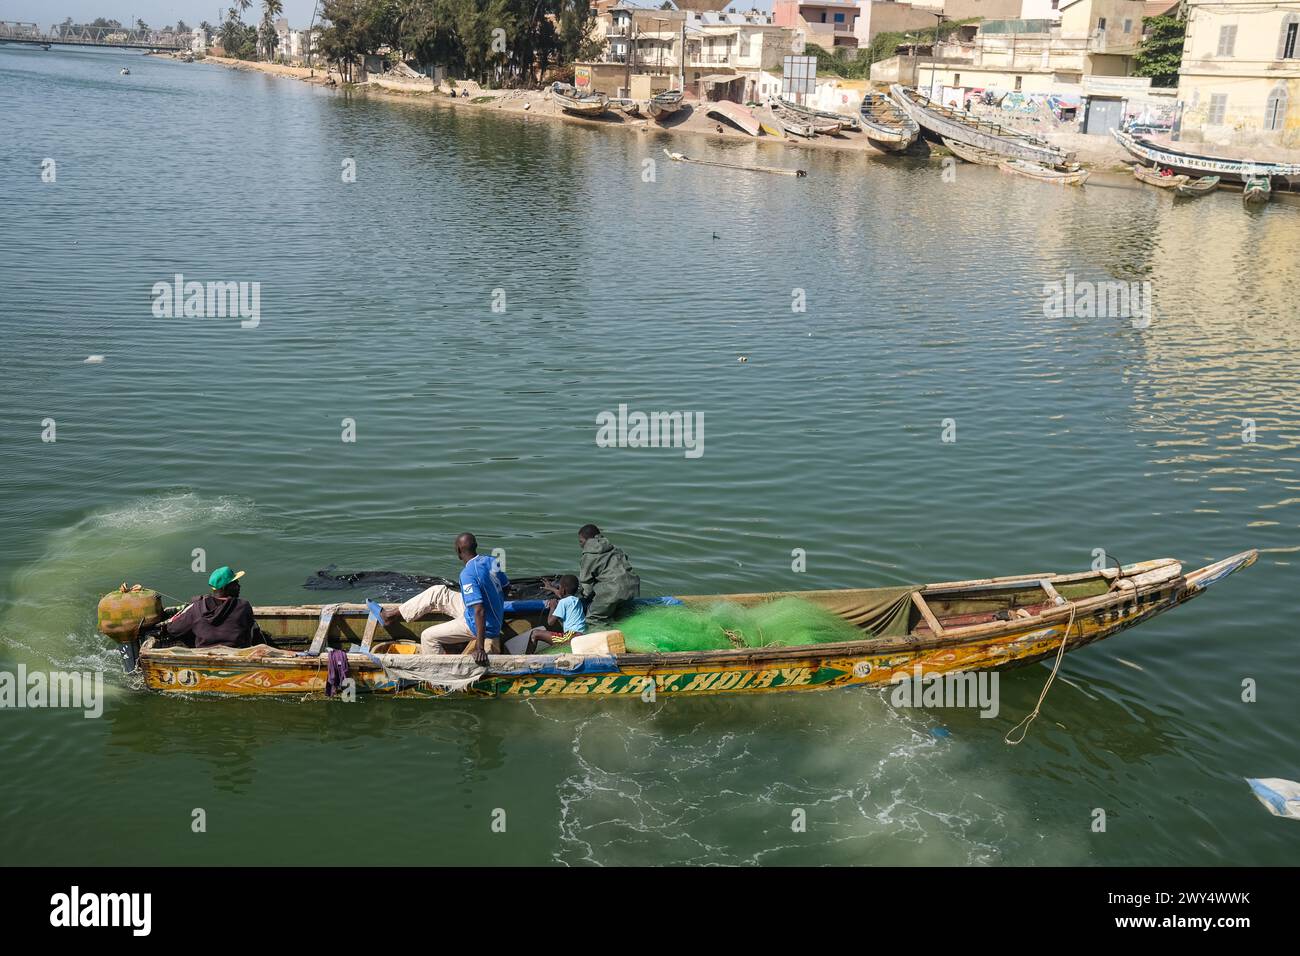 Nicolas Remene / Le Pictorium -  The Guet Ndar district in Saint-Louis, Senegal -  31/03/2024  -  Senegal / Saint-Louis / Saint-Louis  -  Fishing boats, one of the main economic activities in Saint-Louis, Senegal, on March 31, 2024.                                                                 Quet Ndar is a fishing district in Saint-Louis, Senegal, also known for having one of the highest population densities in the world. It is located on the Langue de Barbarie, which has been facing coastal erosion for years. Today, the district is threatened by the heavy swell that has battered its shore Stock Photo